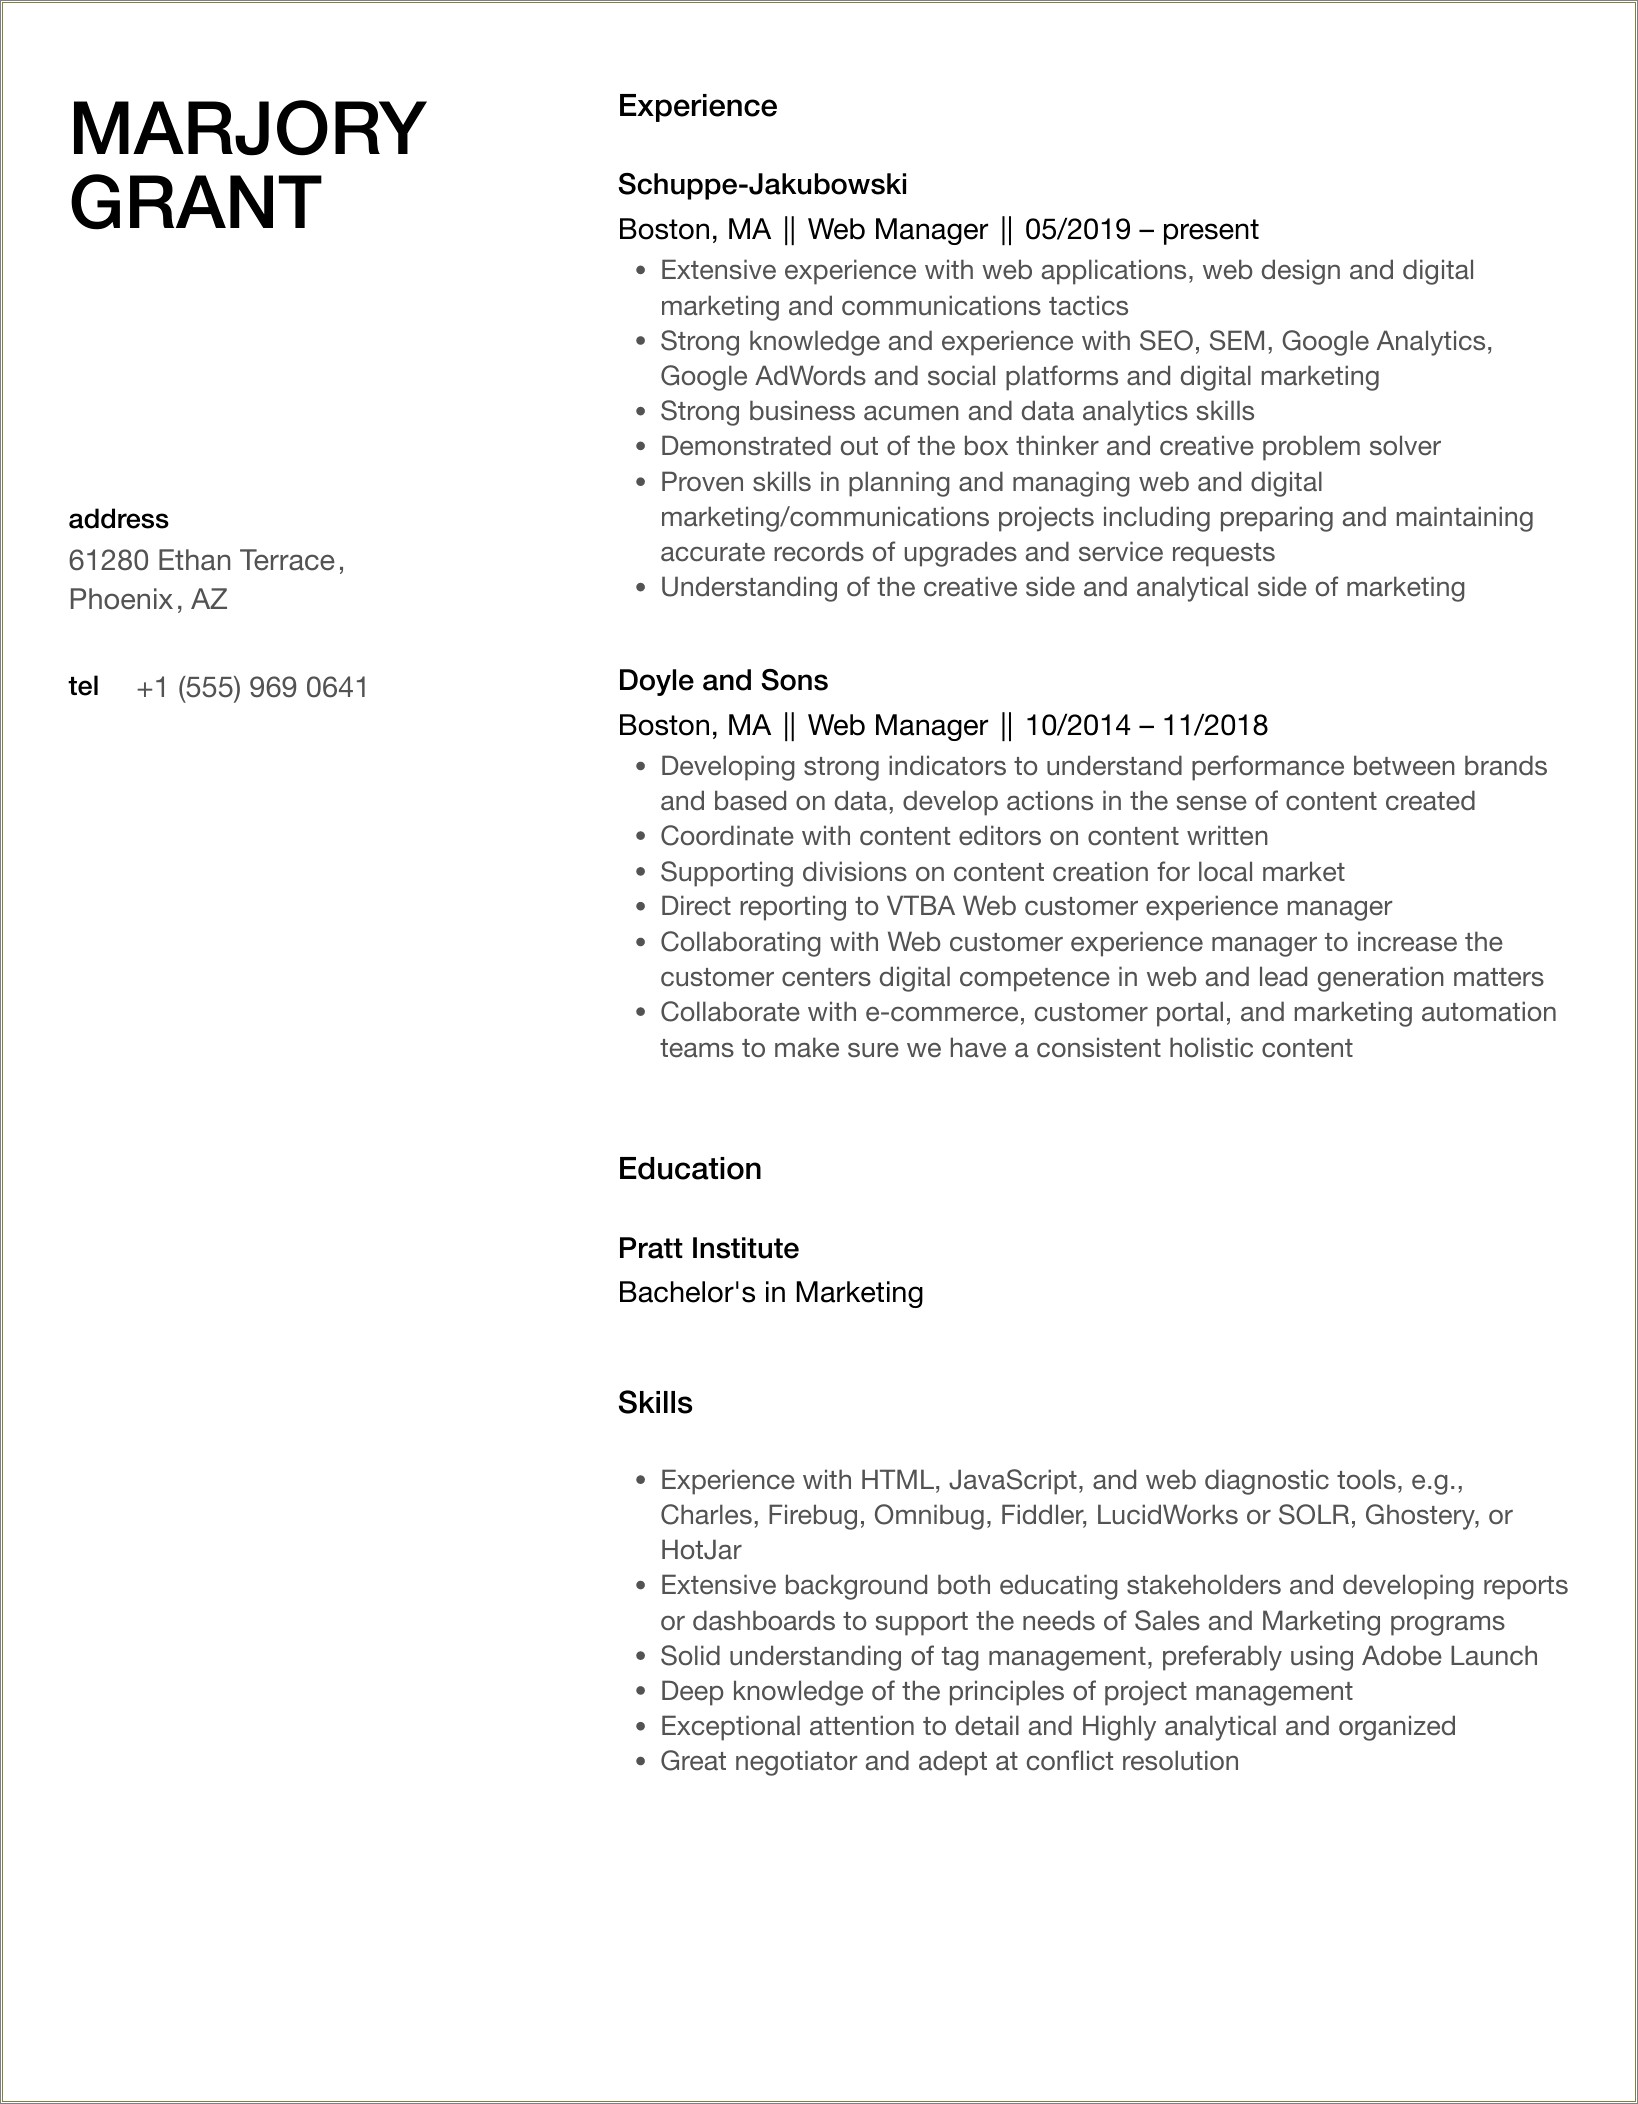 Resume Example Site Askamanager.org